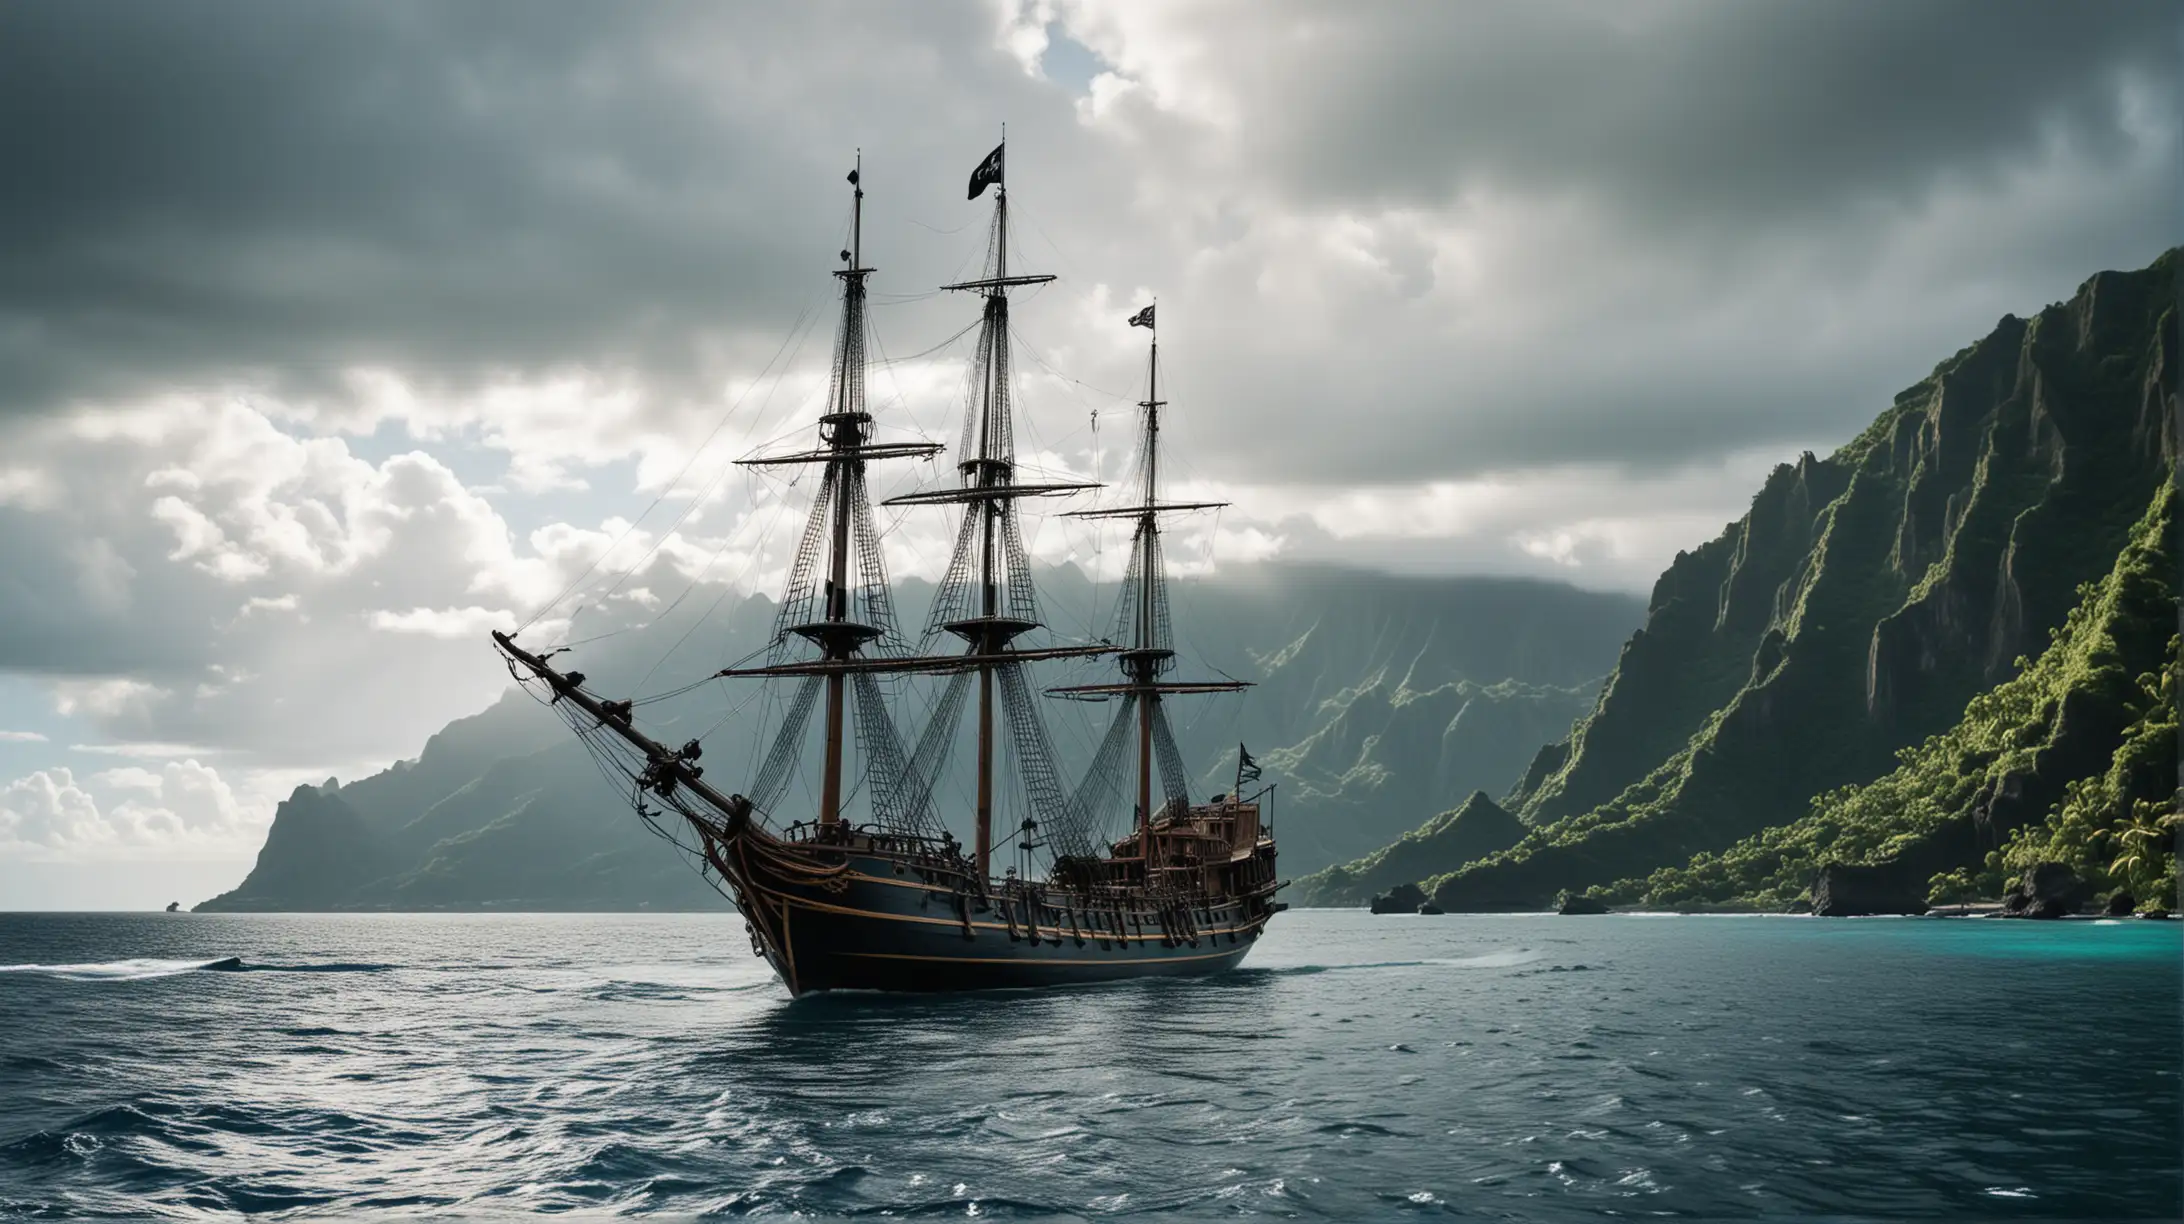 Realistic Photography of the Black Pearl Pirate Ship Anchored in Calm Tahitian Bay